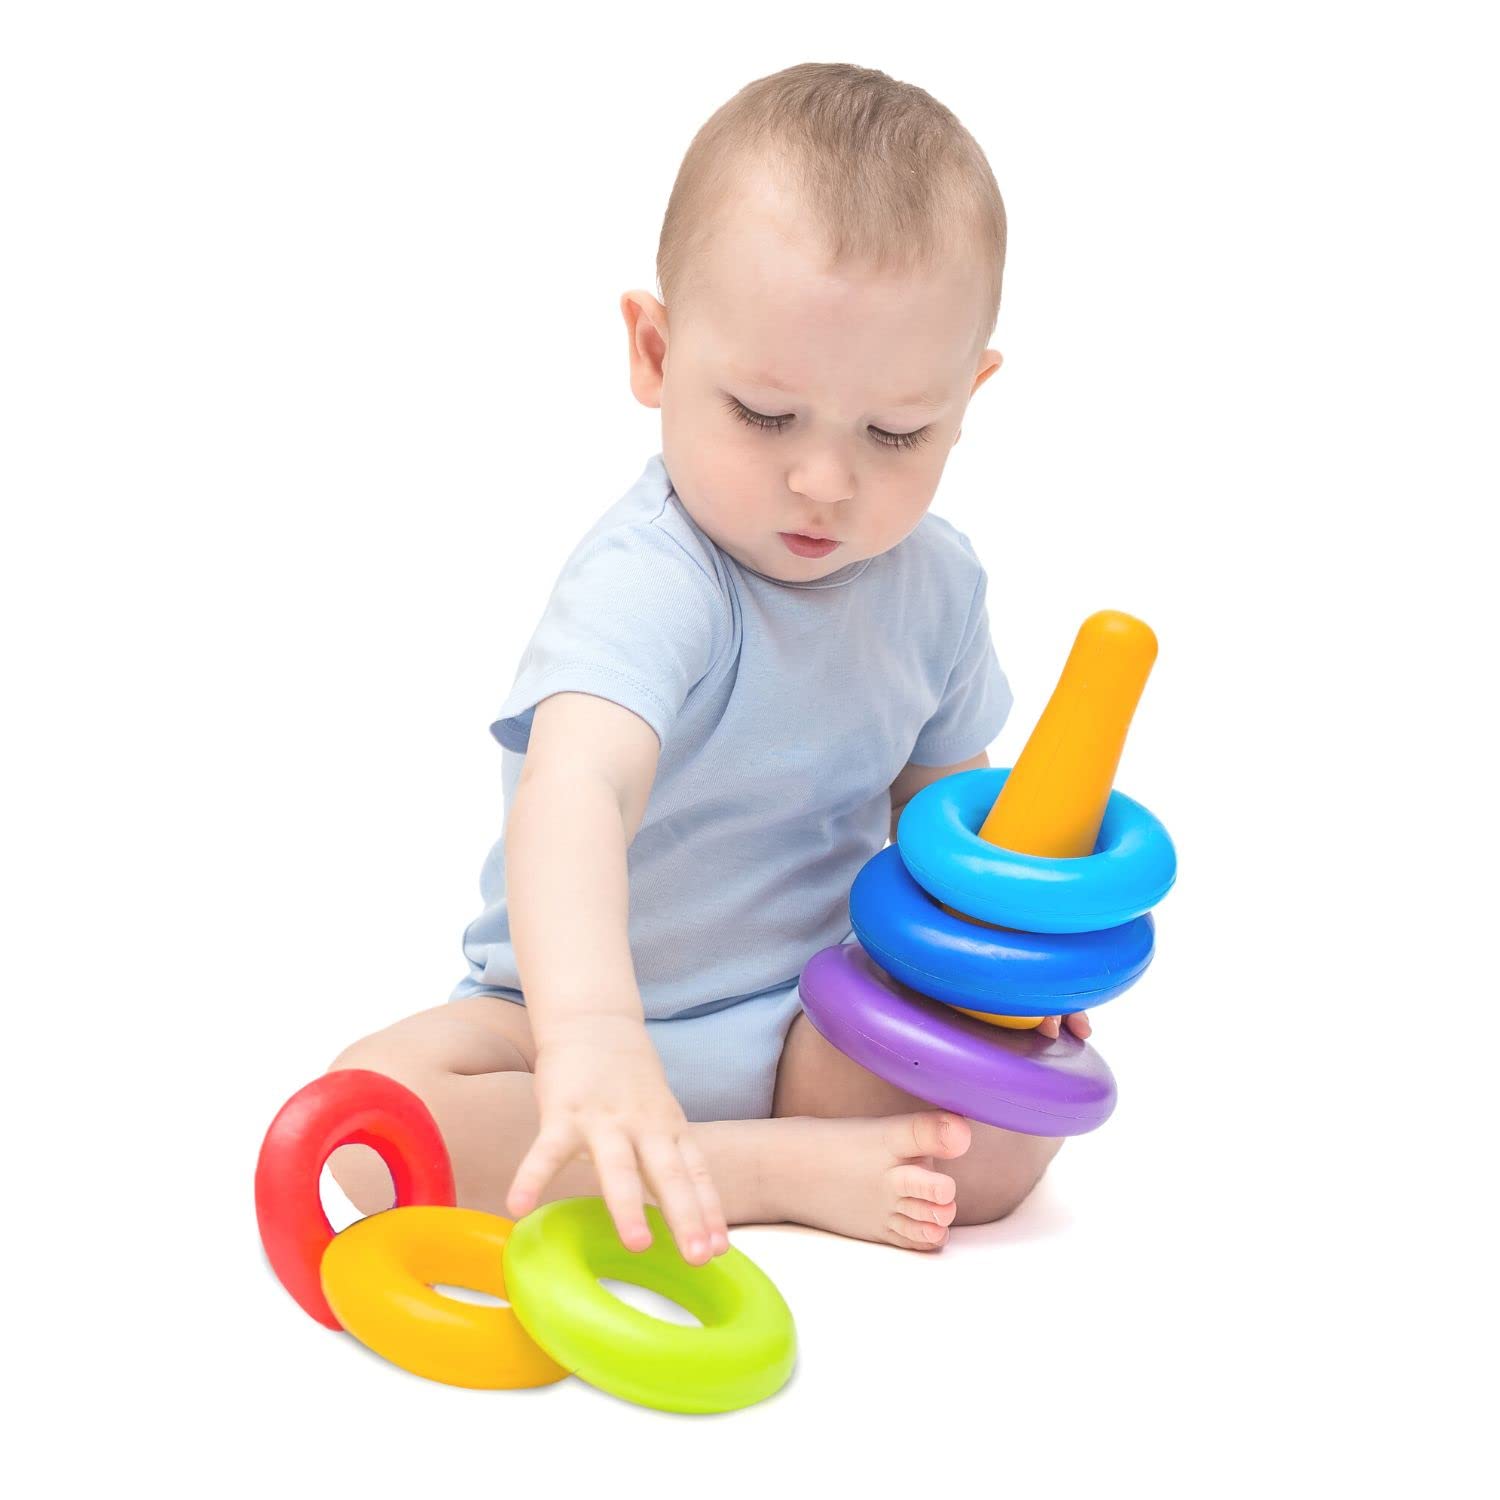 Classic Best Dog Intelligence Toys Set For Kids Stacking Rings